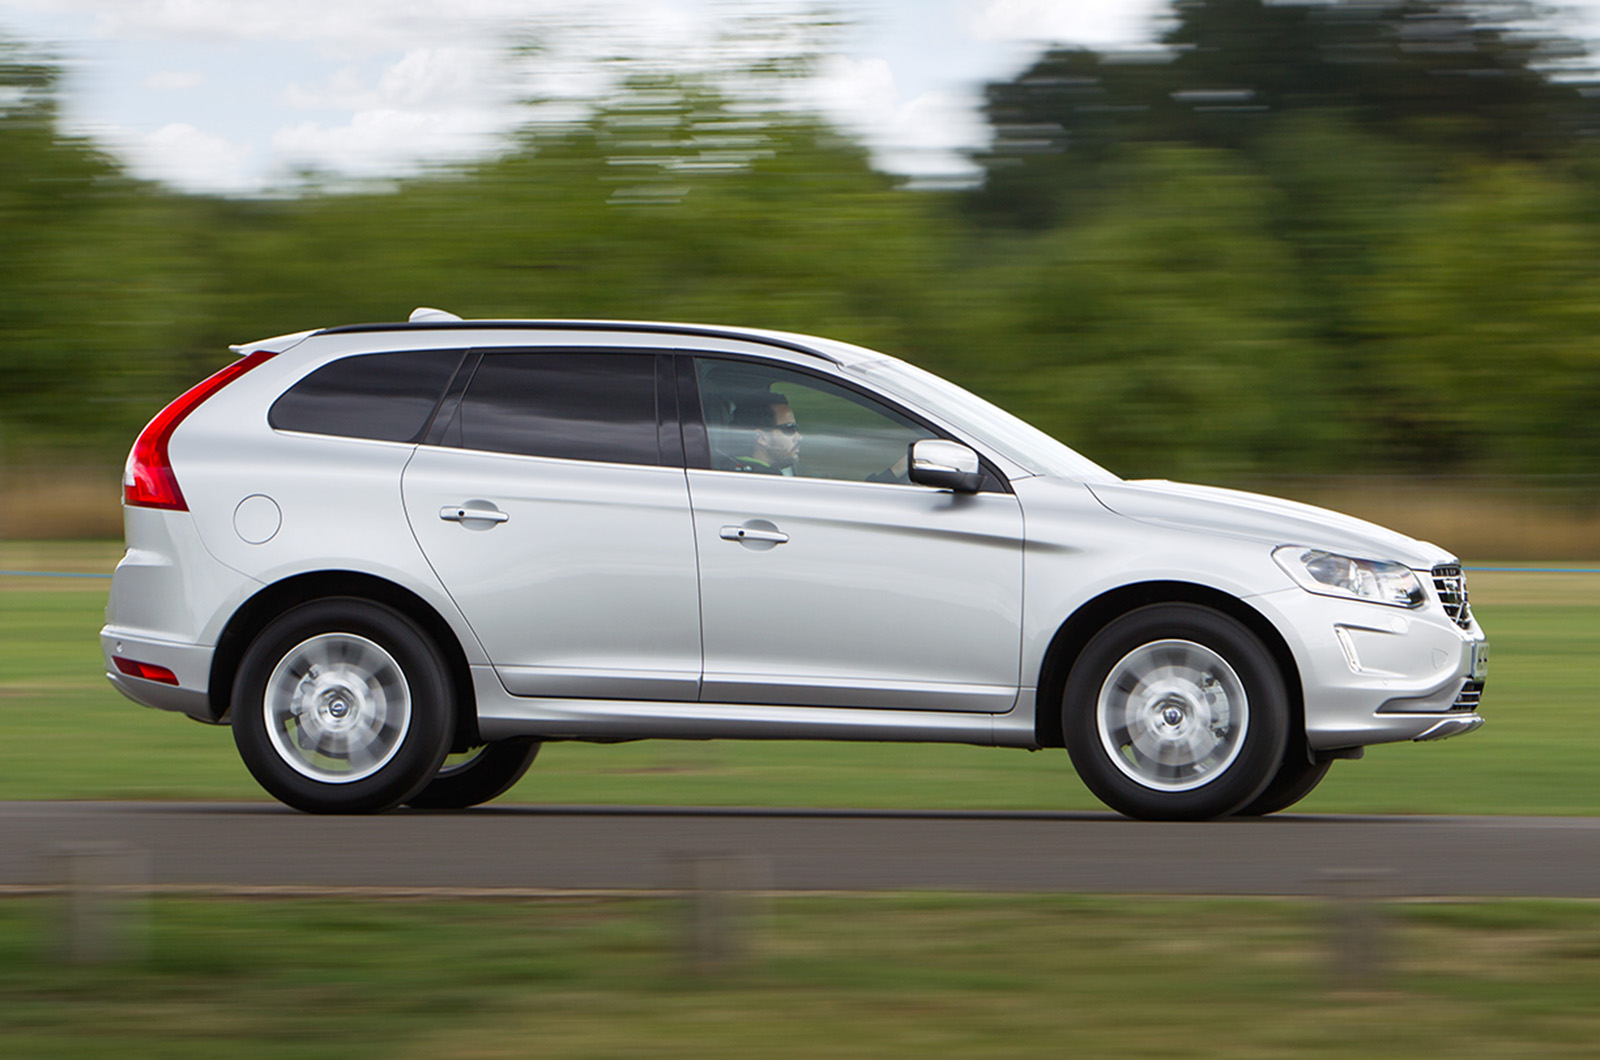 Volvo XC60 D5 AWD first drive review Autocar